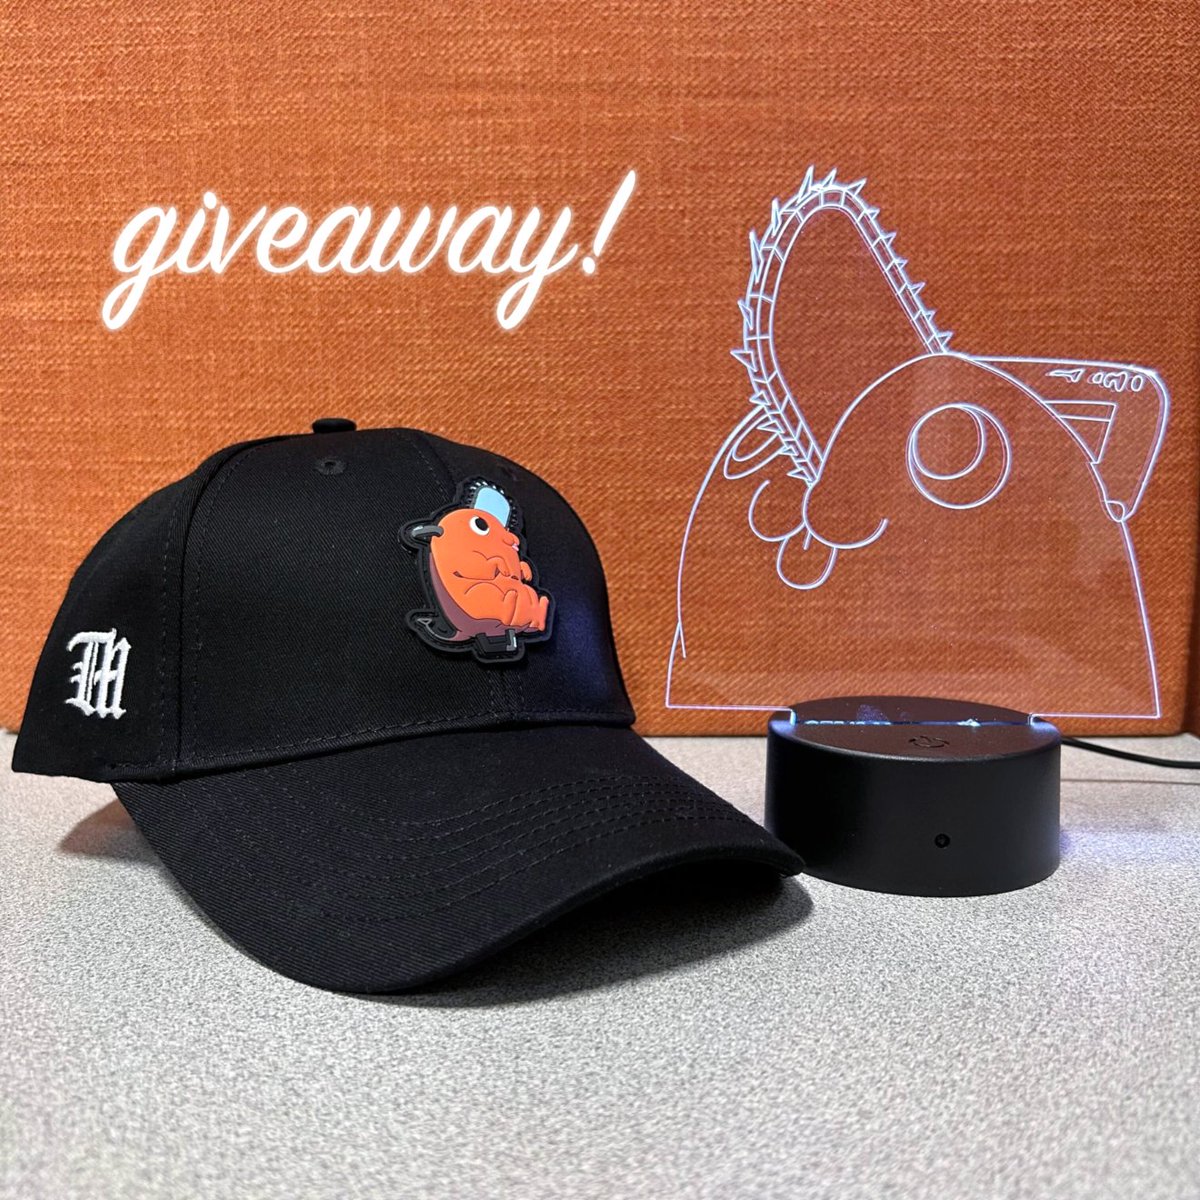 For the first week of #AniMay, we're celebrating Chainsaw Man! What better way to celebrate than with Pochita merch? ⛓️🧡 Enter to win a Dim Mak Pochita cap and an Exclusive Pochita Otaku Lamp!

To enter:
🧡 Follow @ShopCrunchyroll
🧡 Repost this post
🧡 Tag a friend!